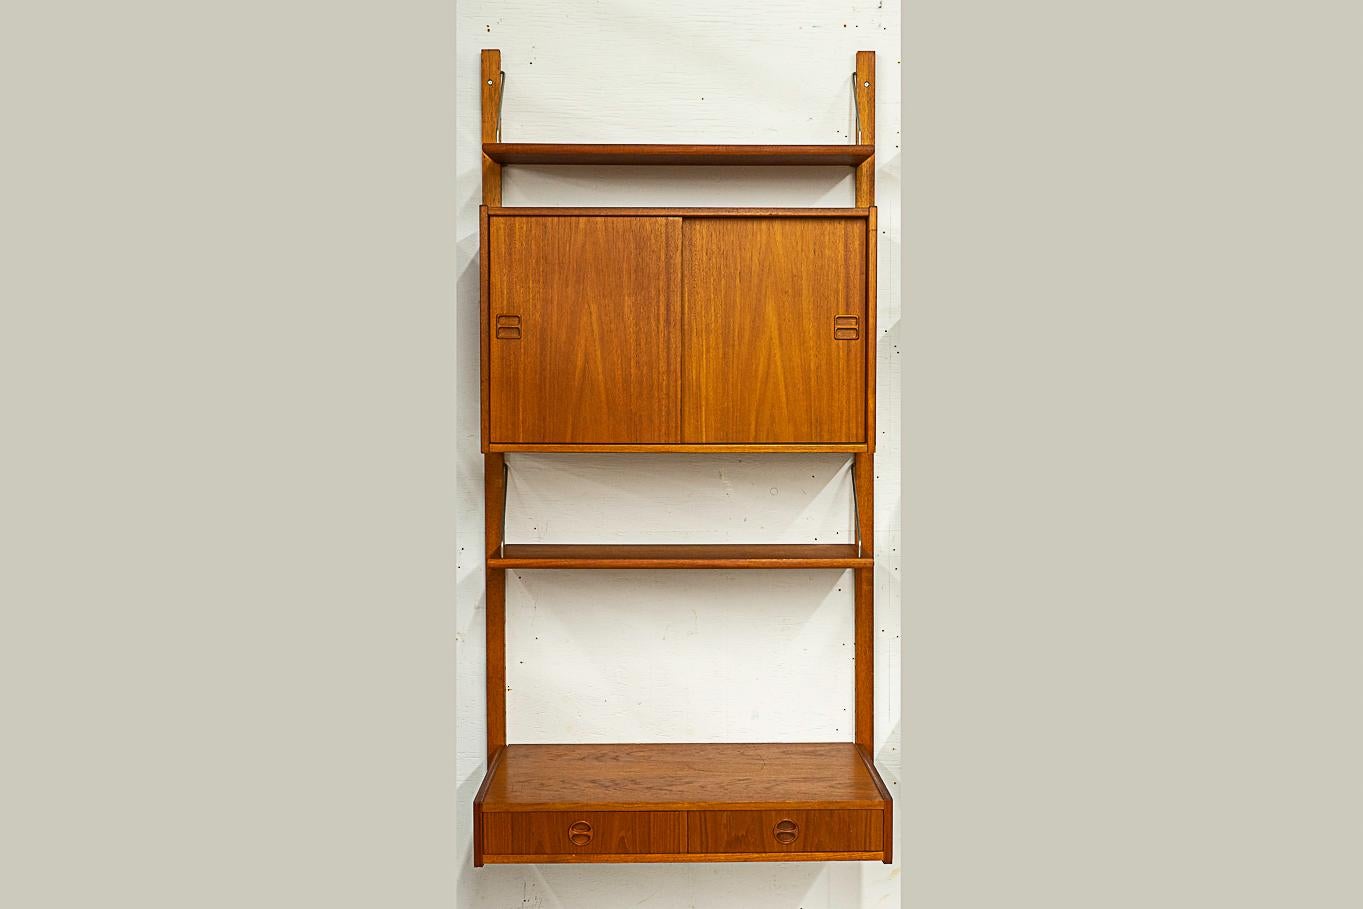 Danish Mid-Century teak wall system, circa 1960's. Fantastic wall system with solid wood trim, stunning book-matched veneer surfaces and dovetail construction. Modular design, hang it any way you like! Includes: sliding door cabinet, desk with